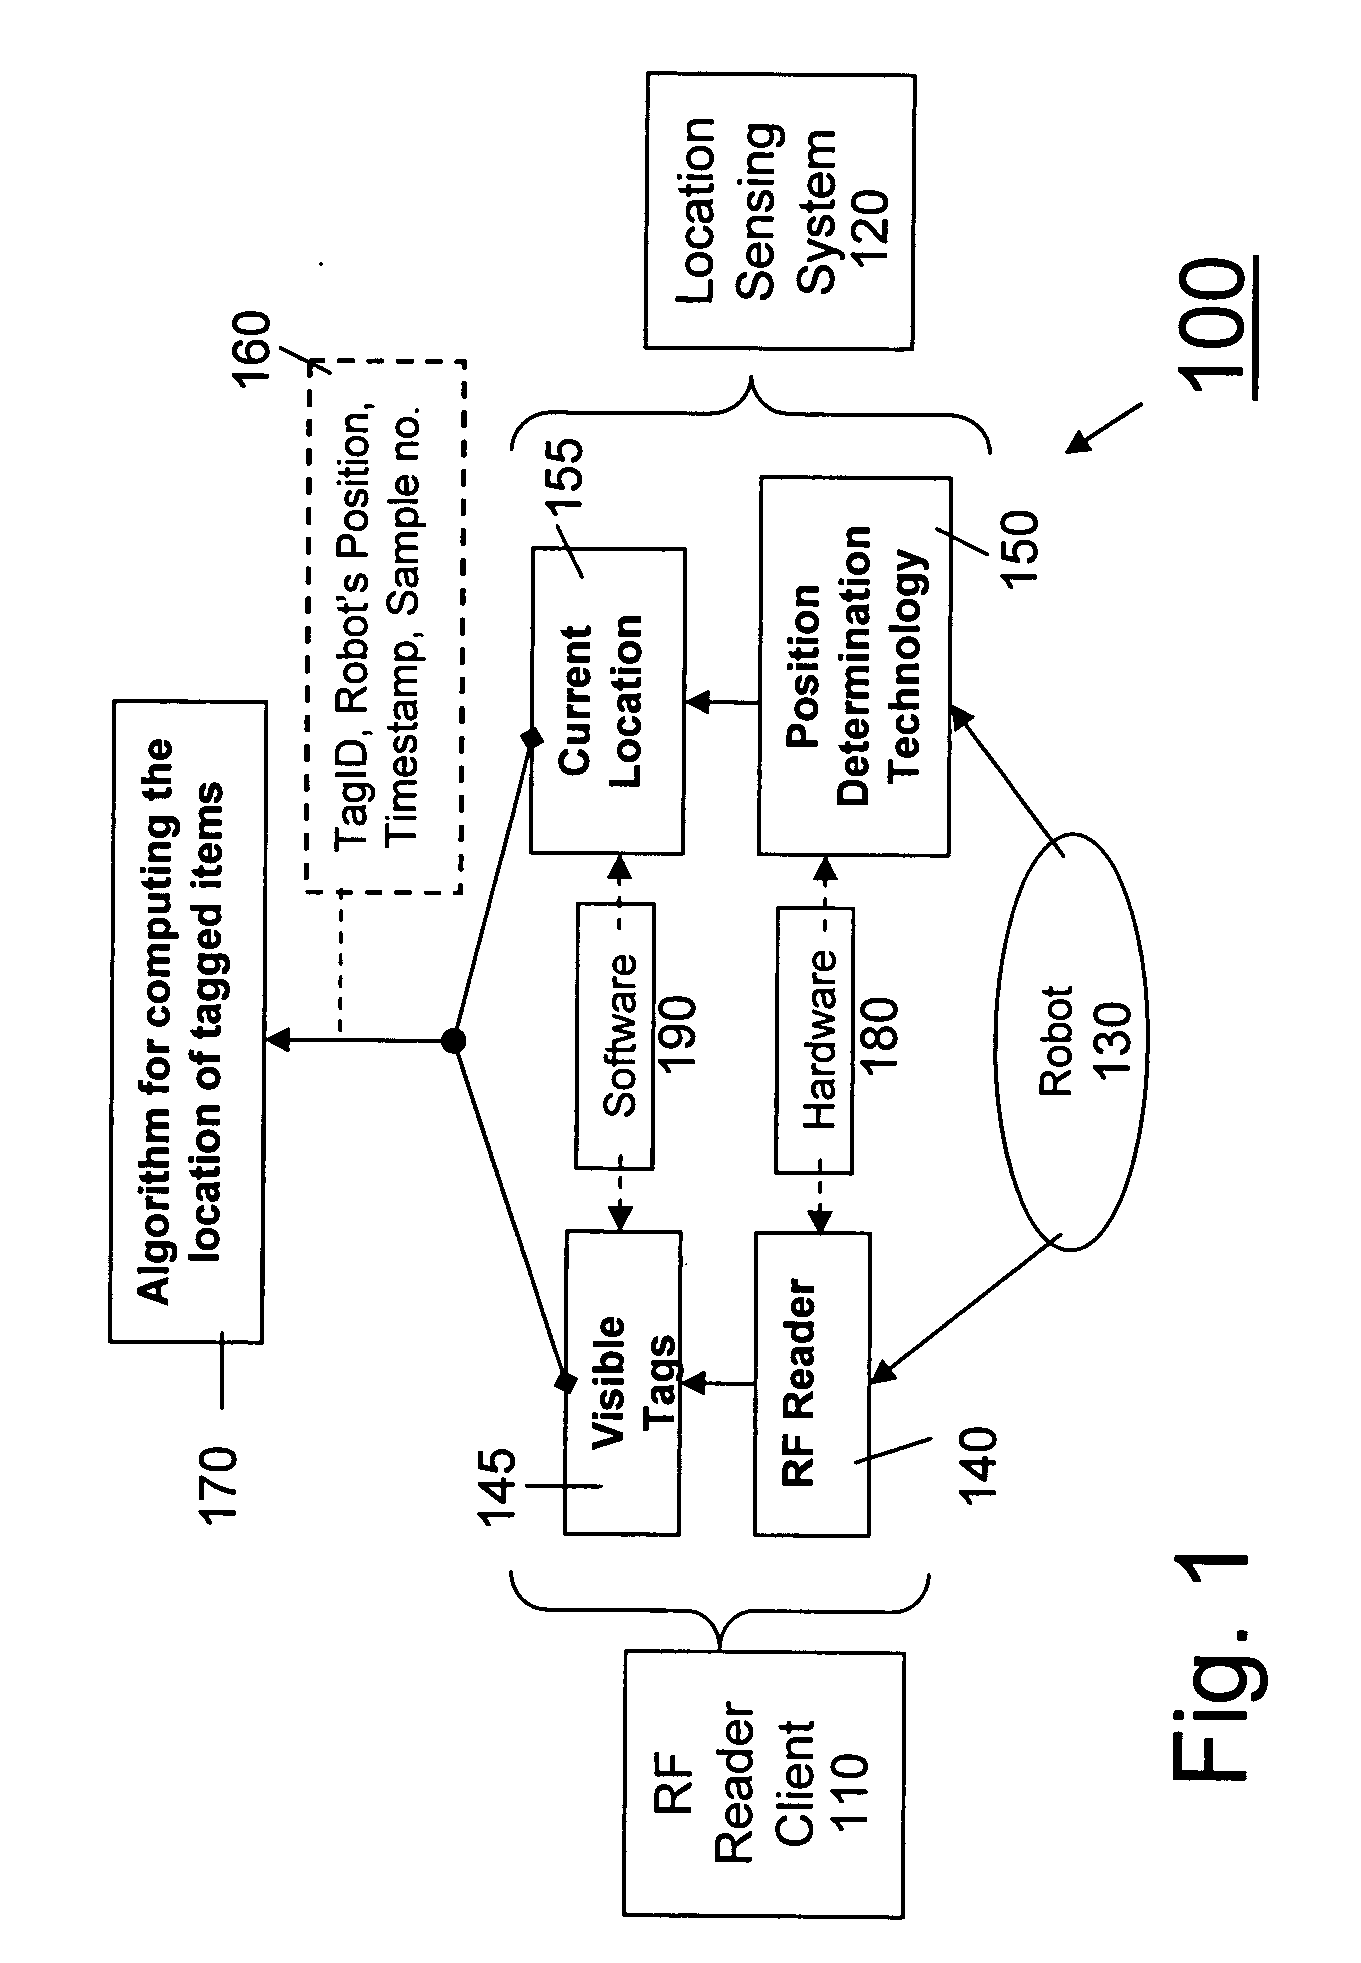 Method and system for autonomous correlation of sensed environmental attributes with entities